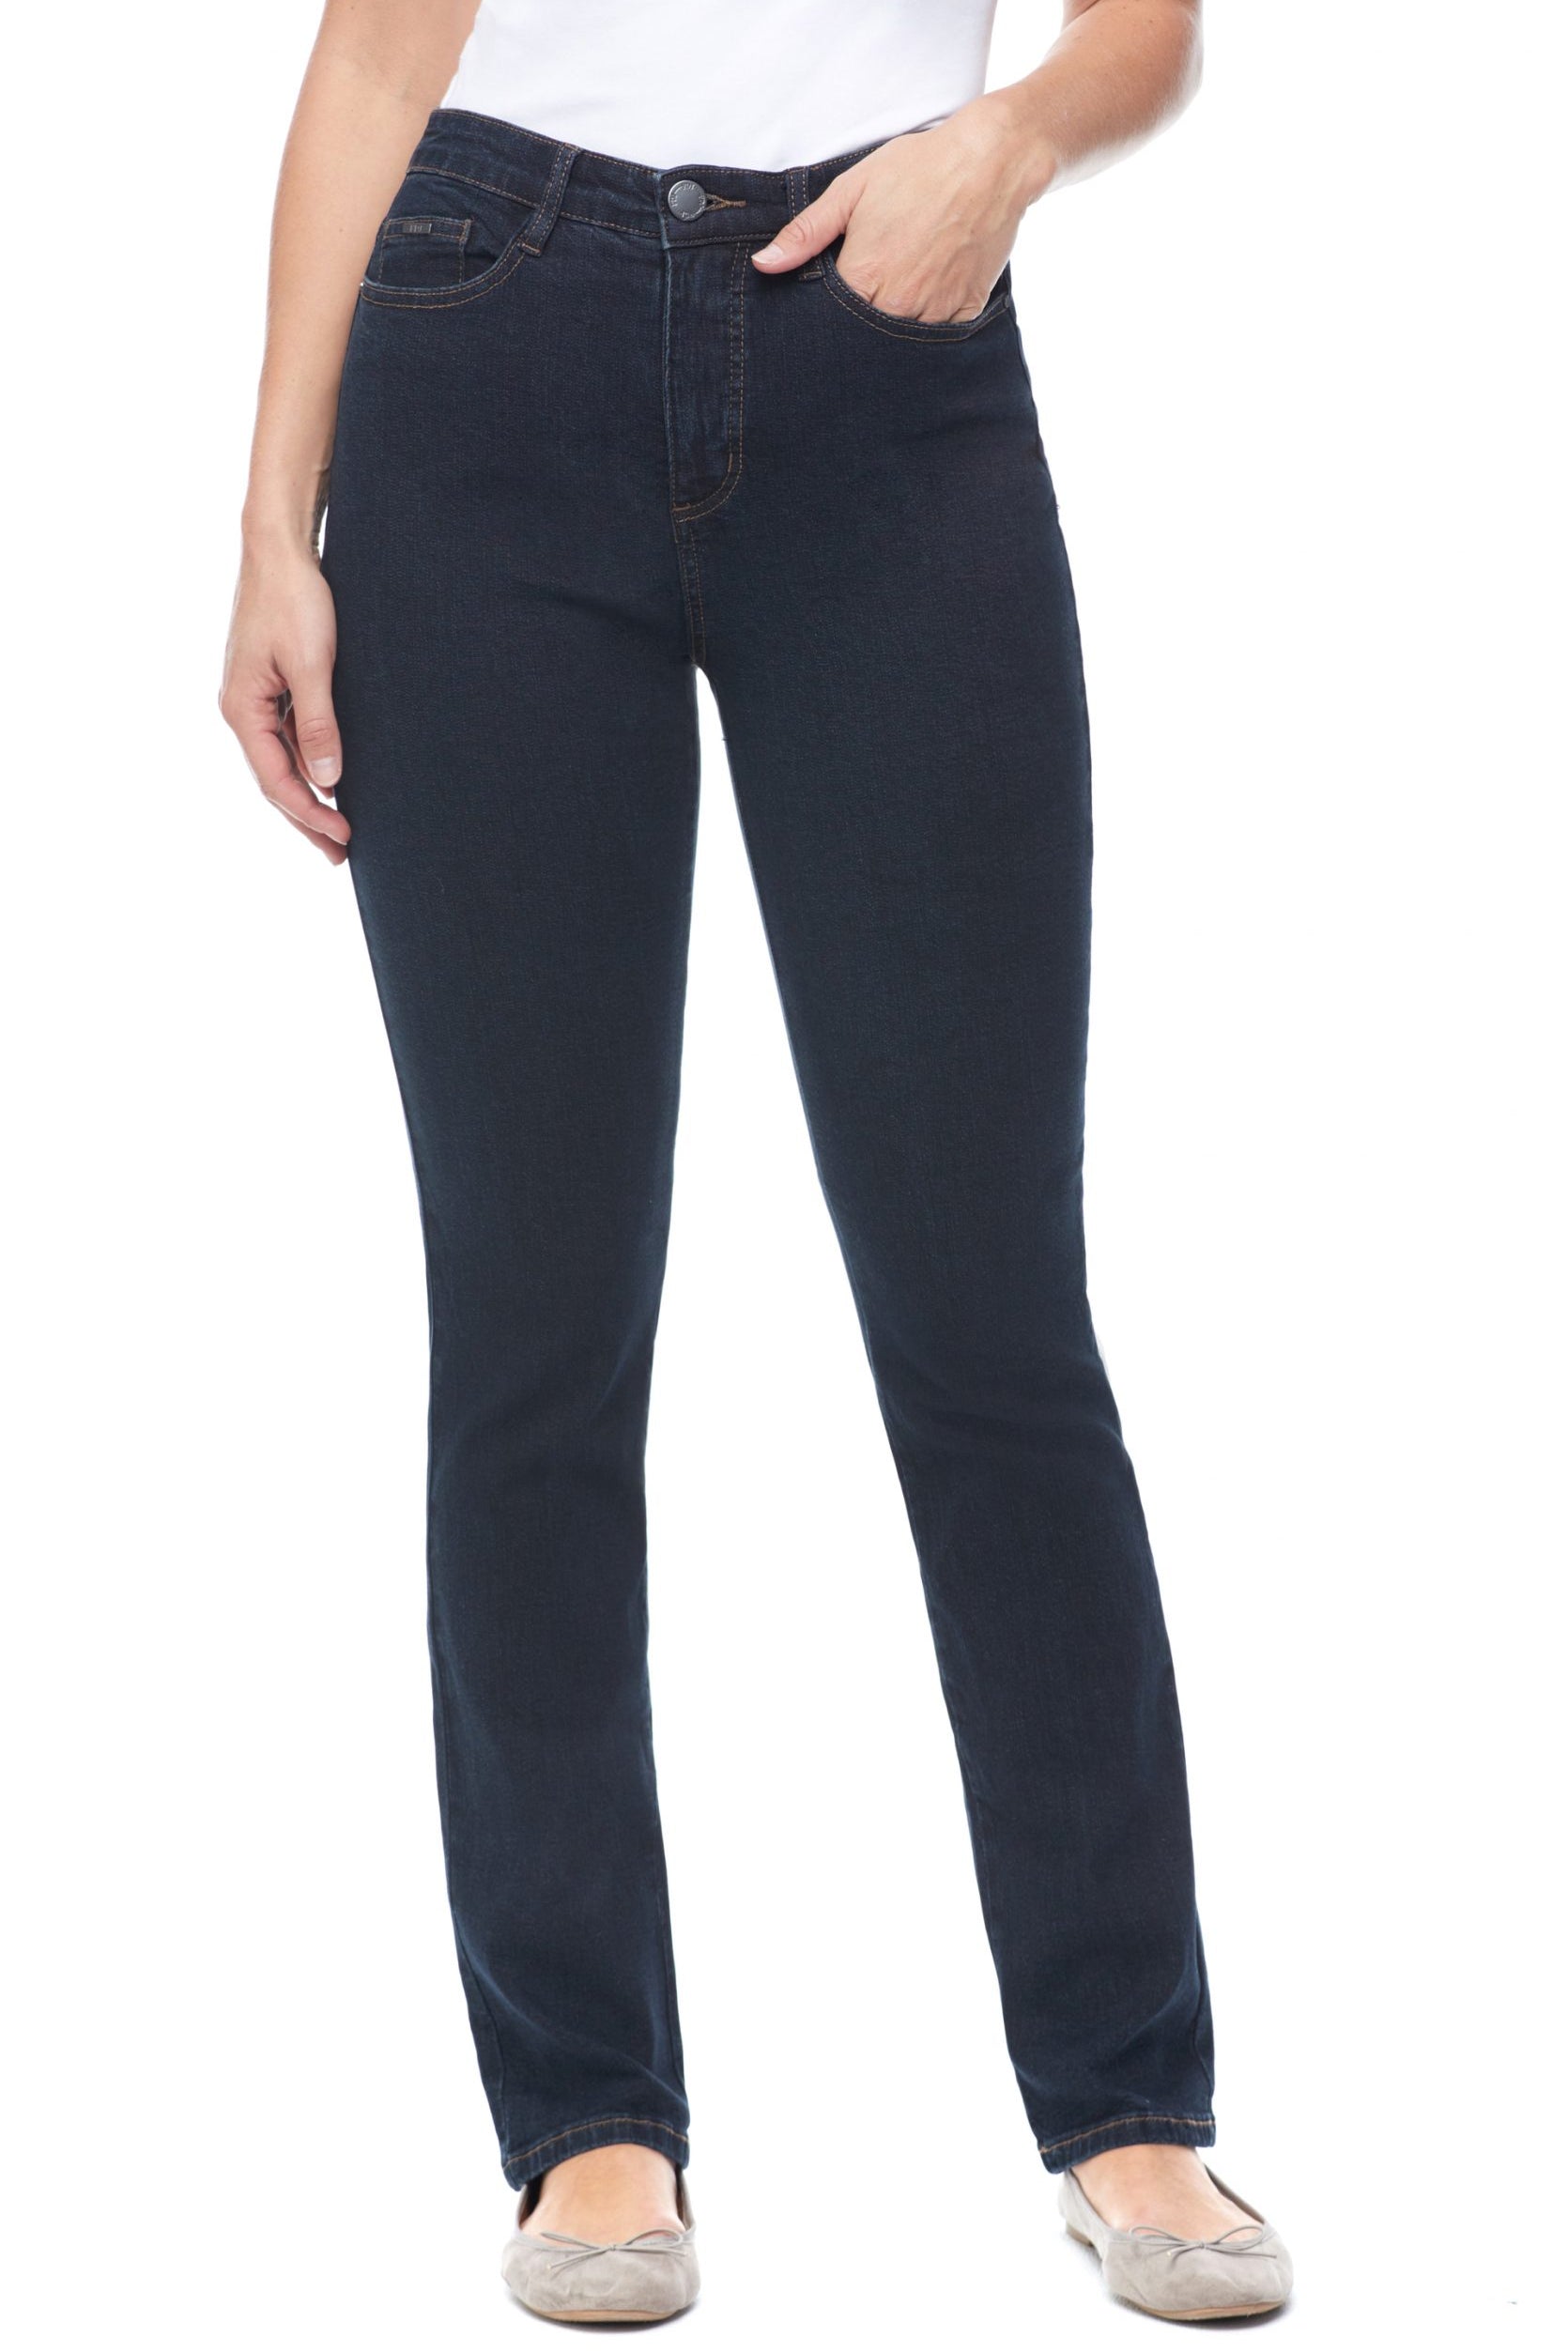 Mindy Petite 7/8 Slim Pants by Forever New Petite Online